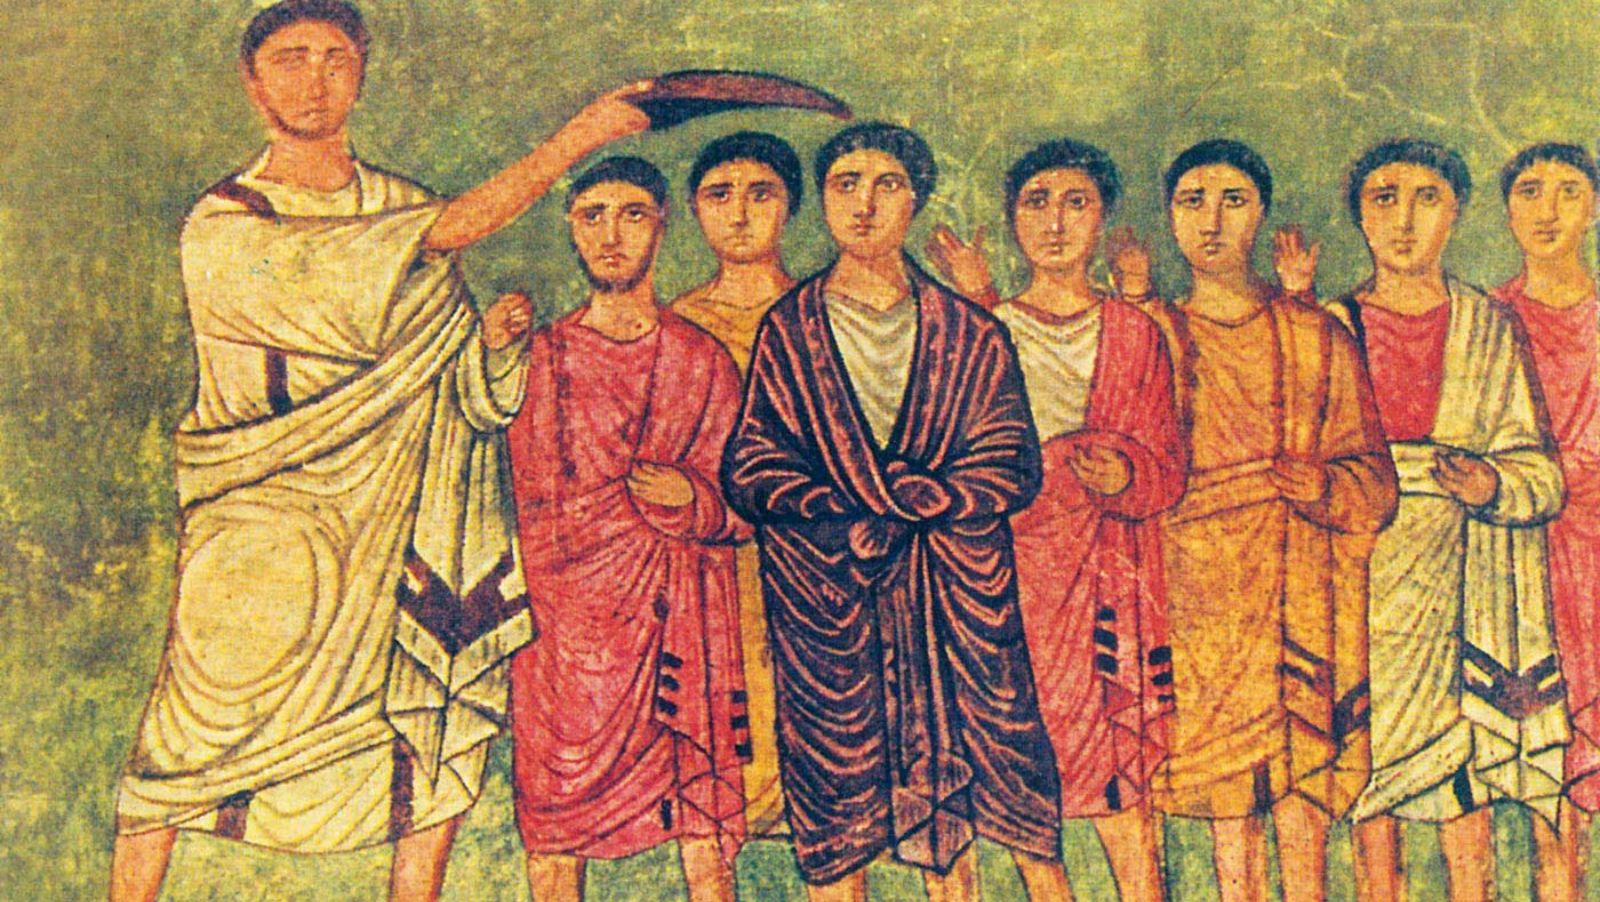 The biblical King David anointed king by Samuel while wearing purple, as pictured in a wall painting from the ancient Dura Europos Synagogue in Syria. Image reworked by Marsyas/Wikimedia Commons